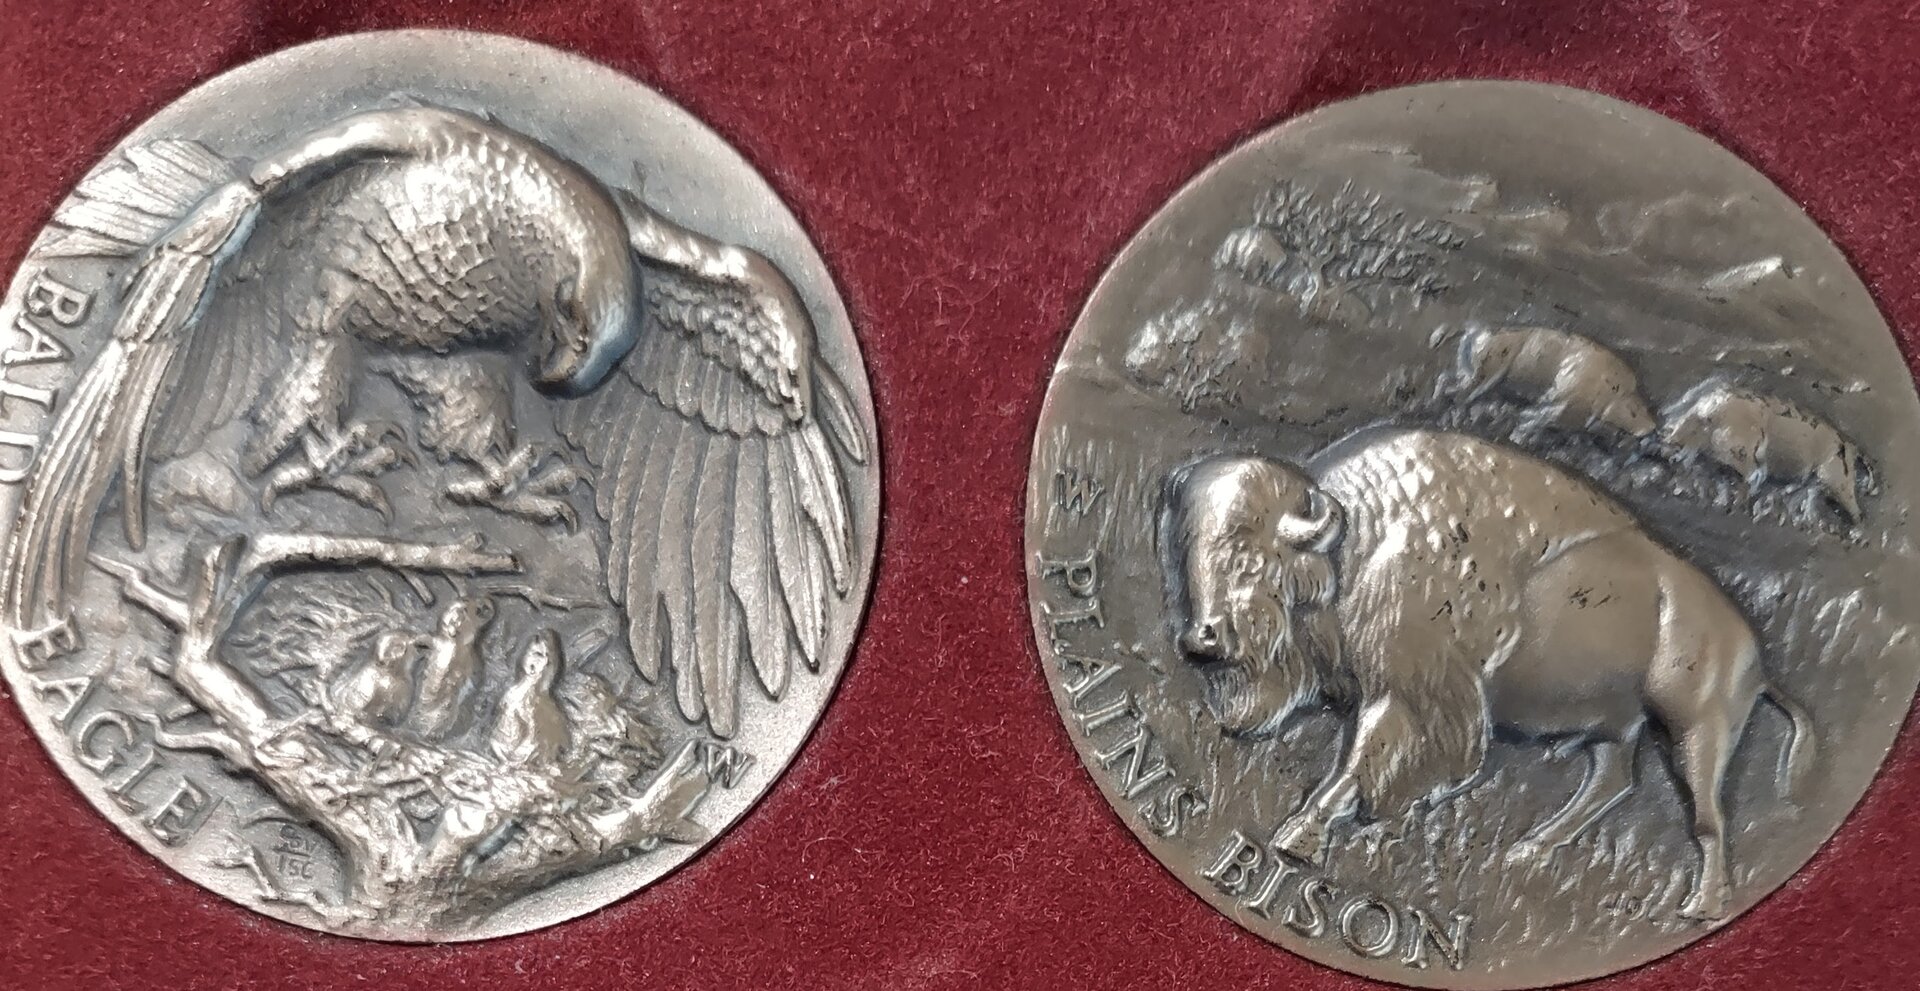 Eagle and Bison coins.jpg